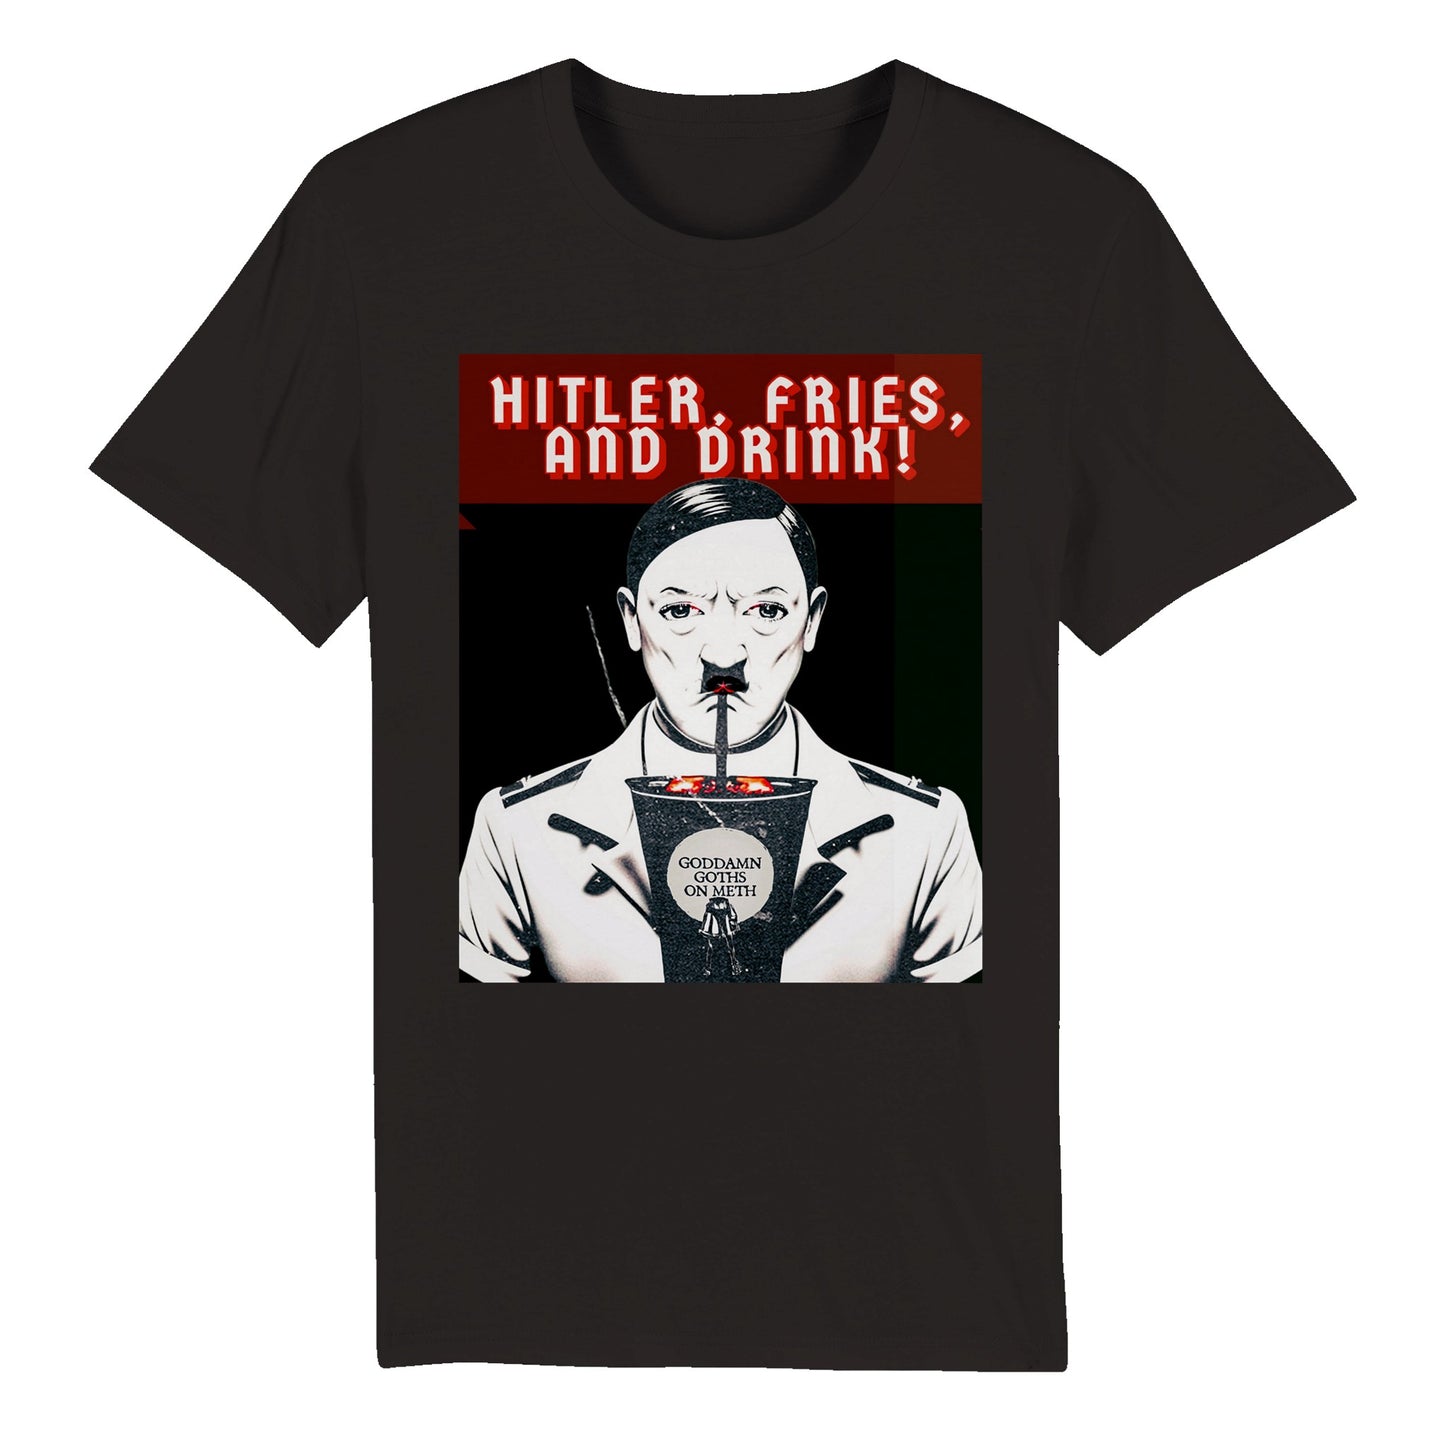 HITLER, FRIES, AND DRINK! - Heavyweight Unisex Crewneck T-shirt - Organic Unisex Crewneck T-shirt